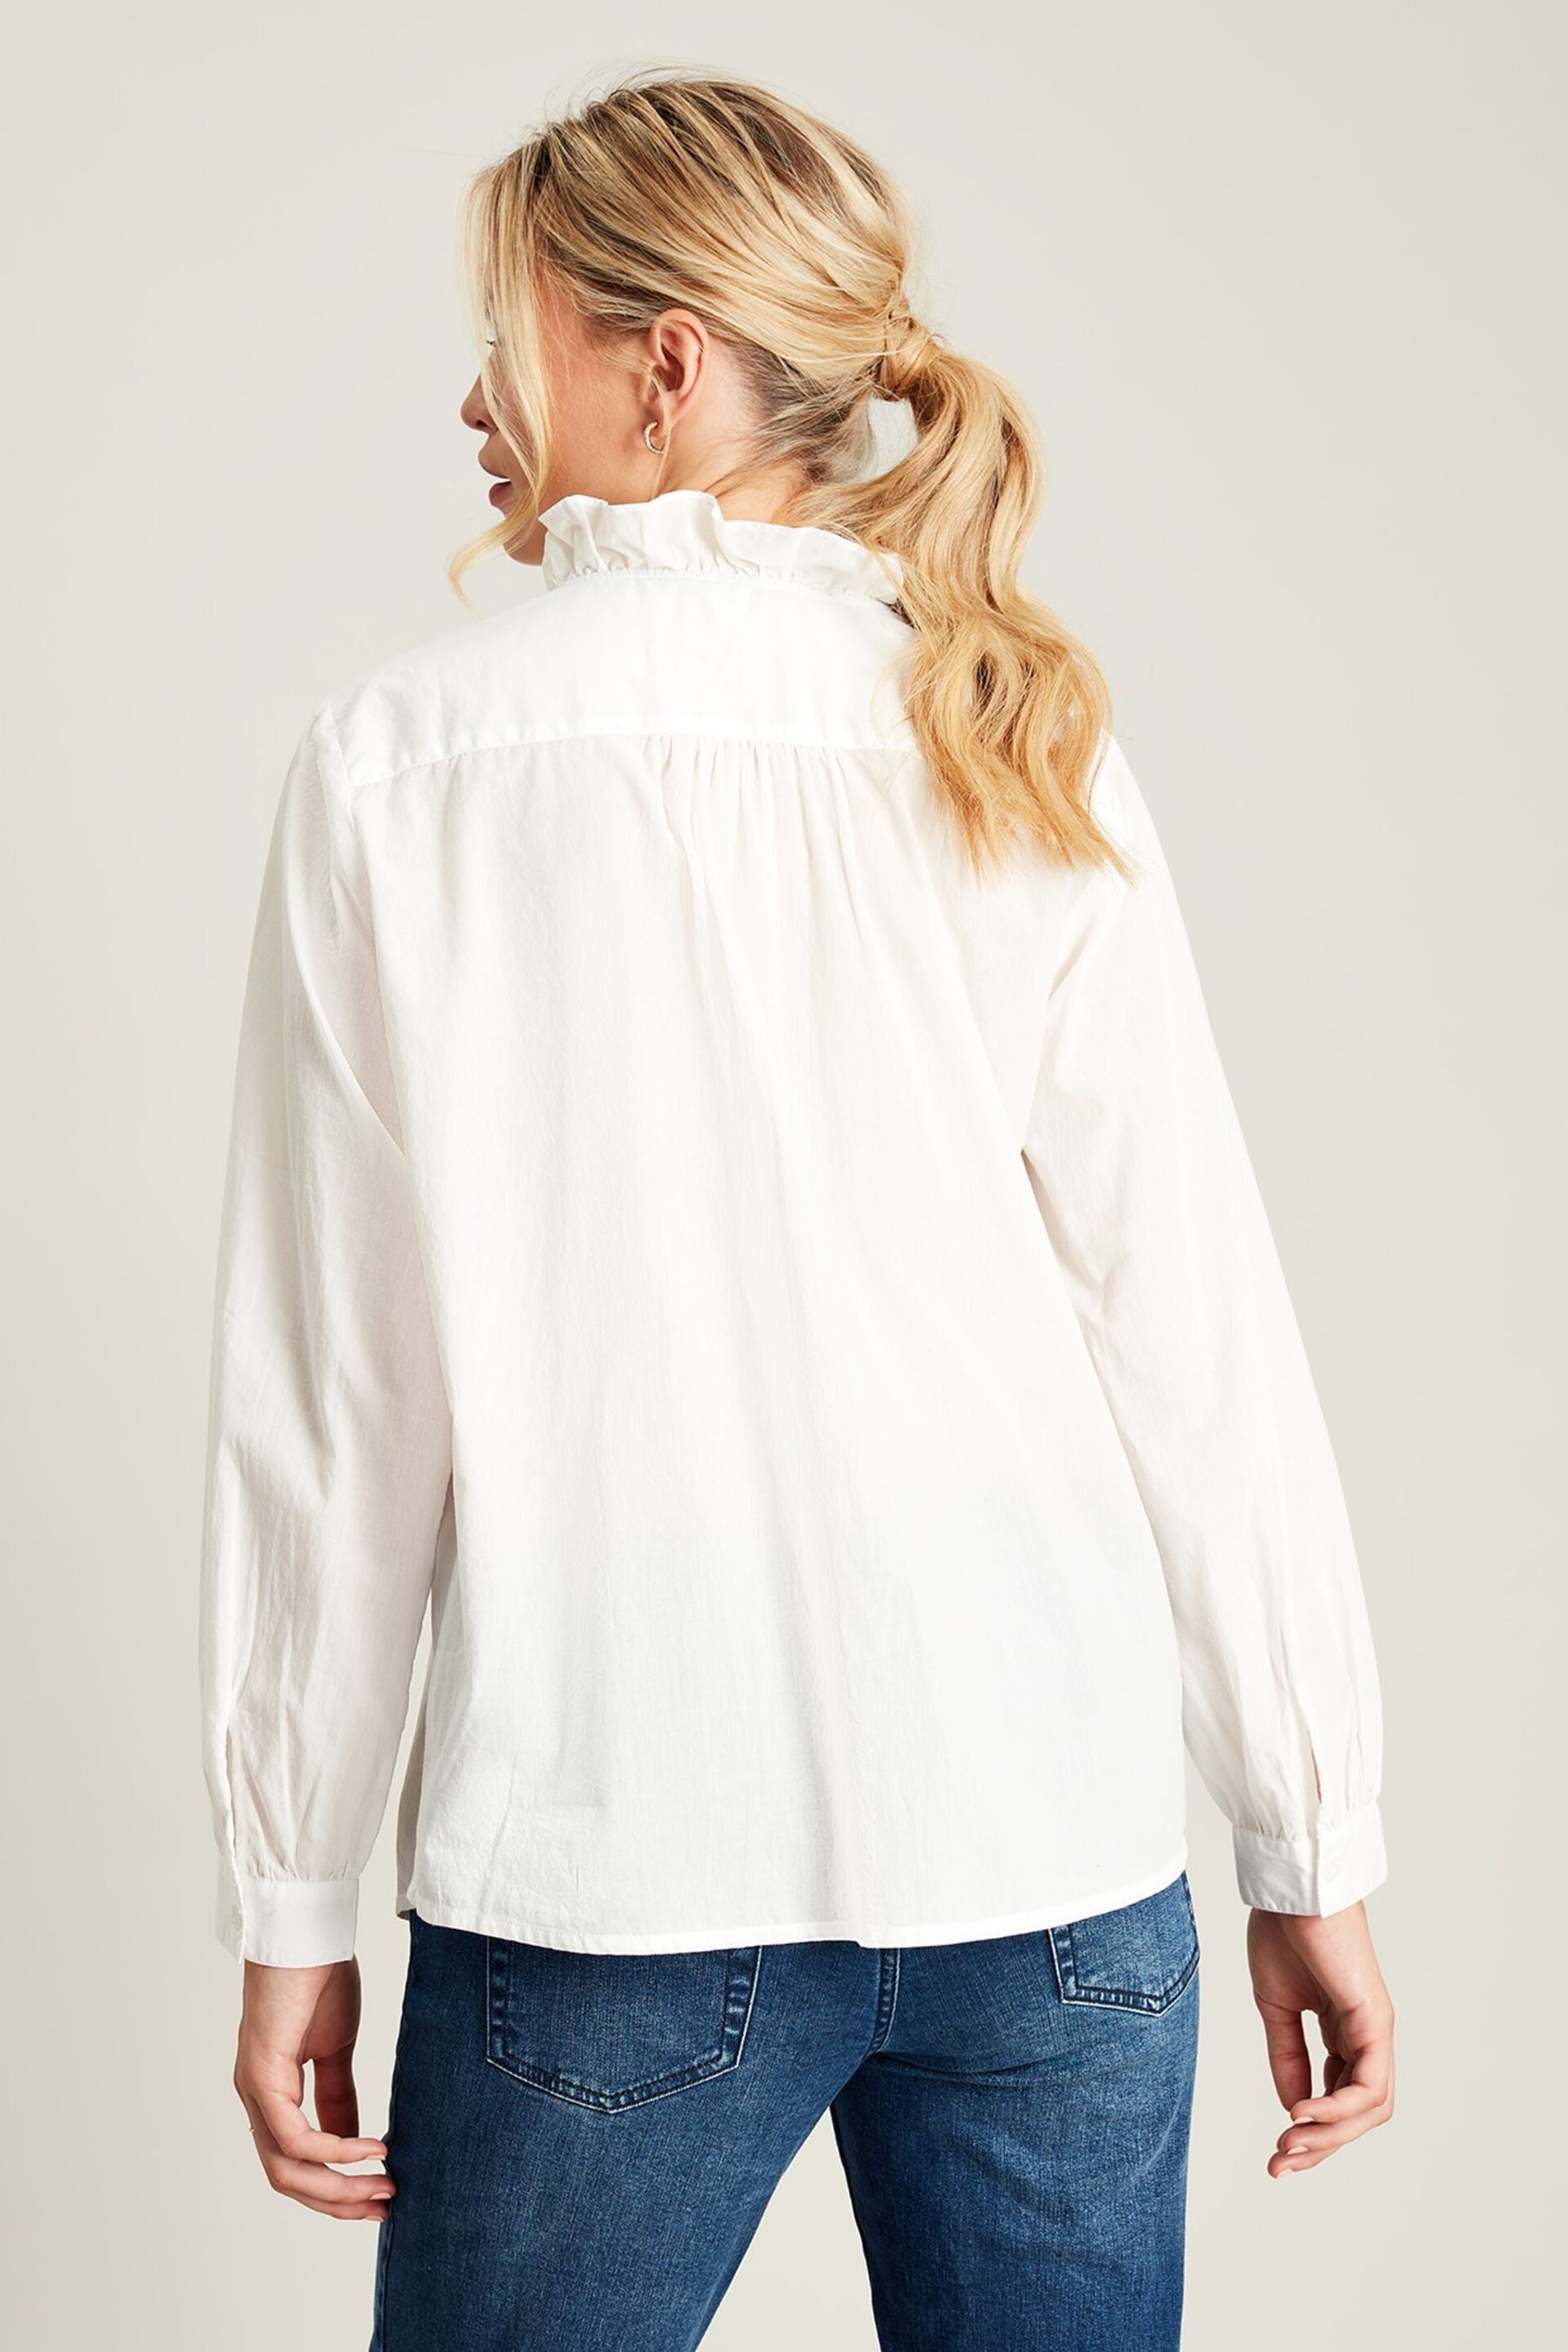 Joules Melanie White Frill Blouse - Image 3 of 5